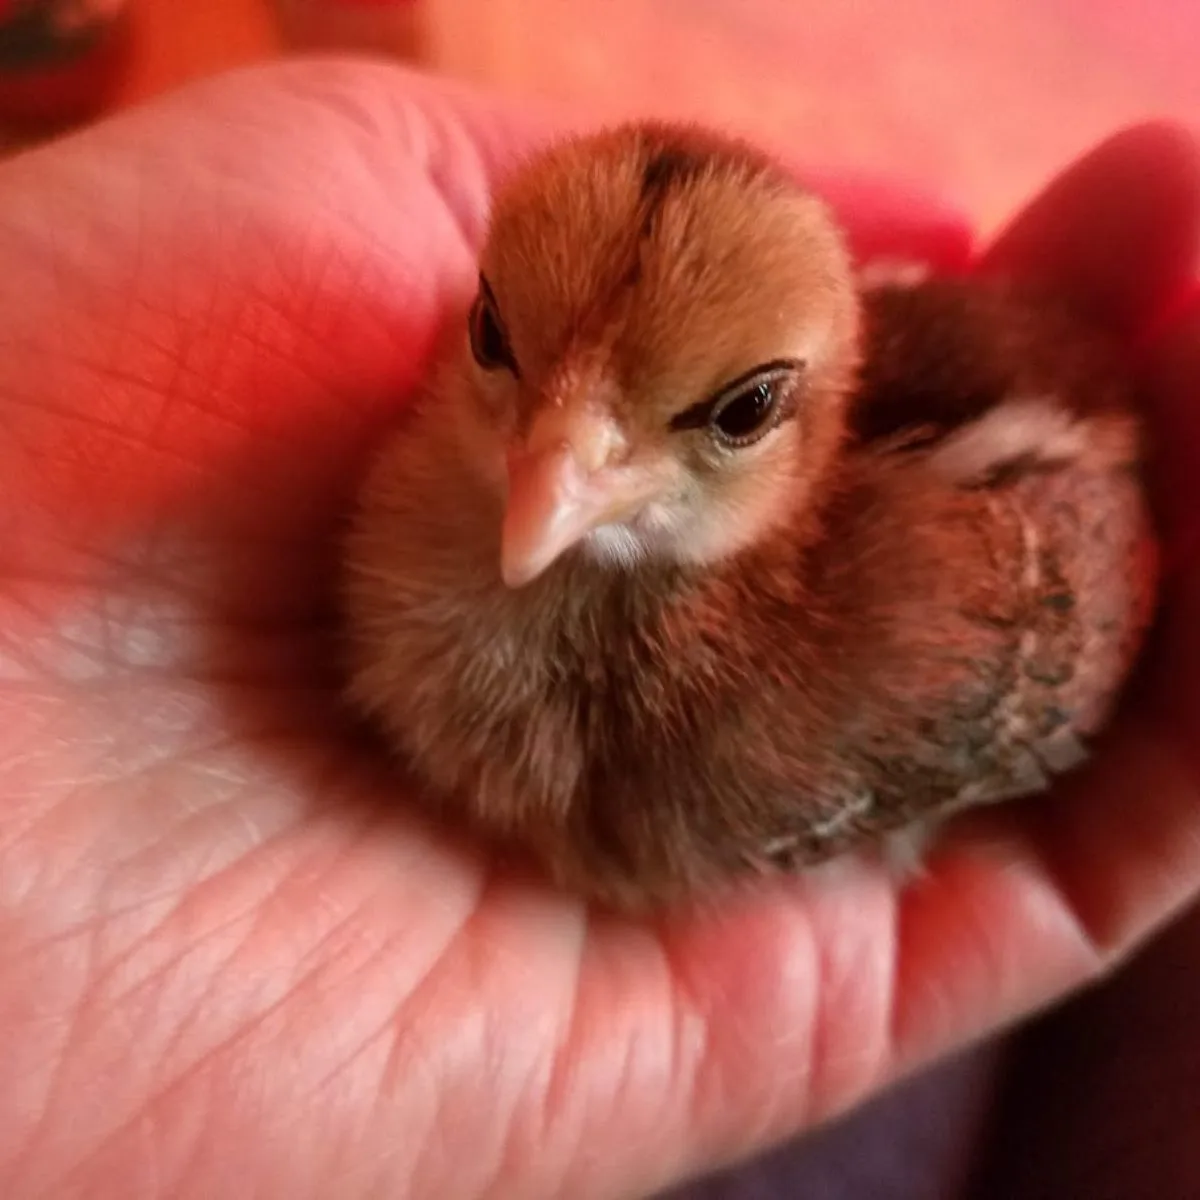 tiny old English Bantam chicken in my palm